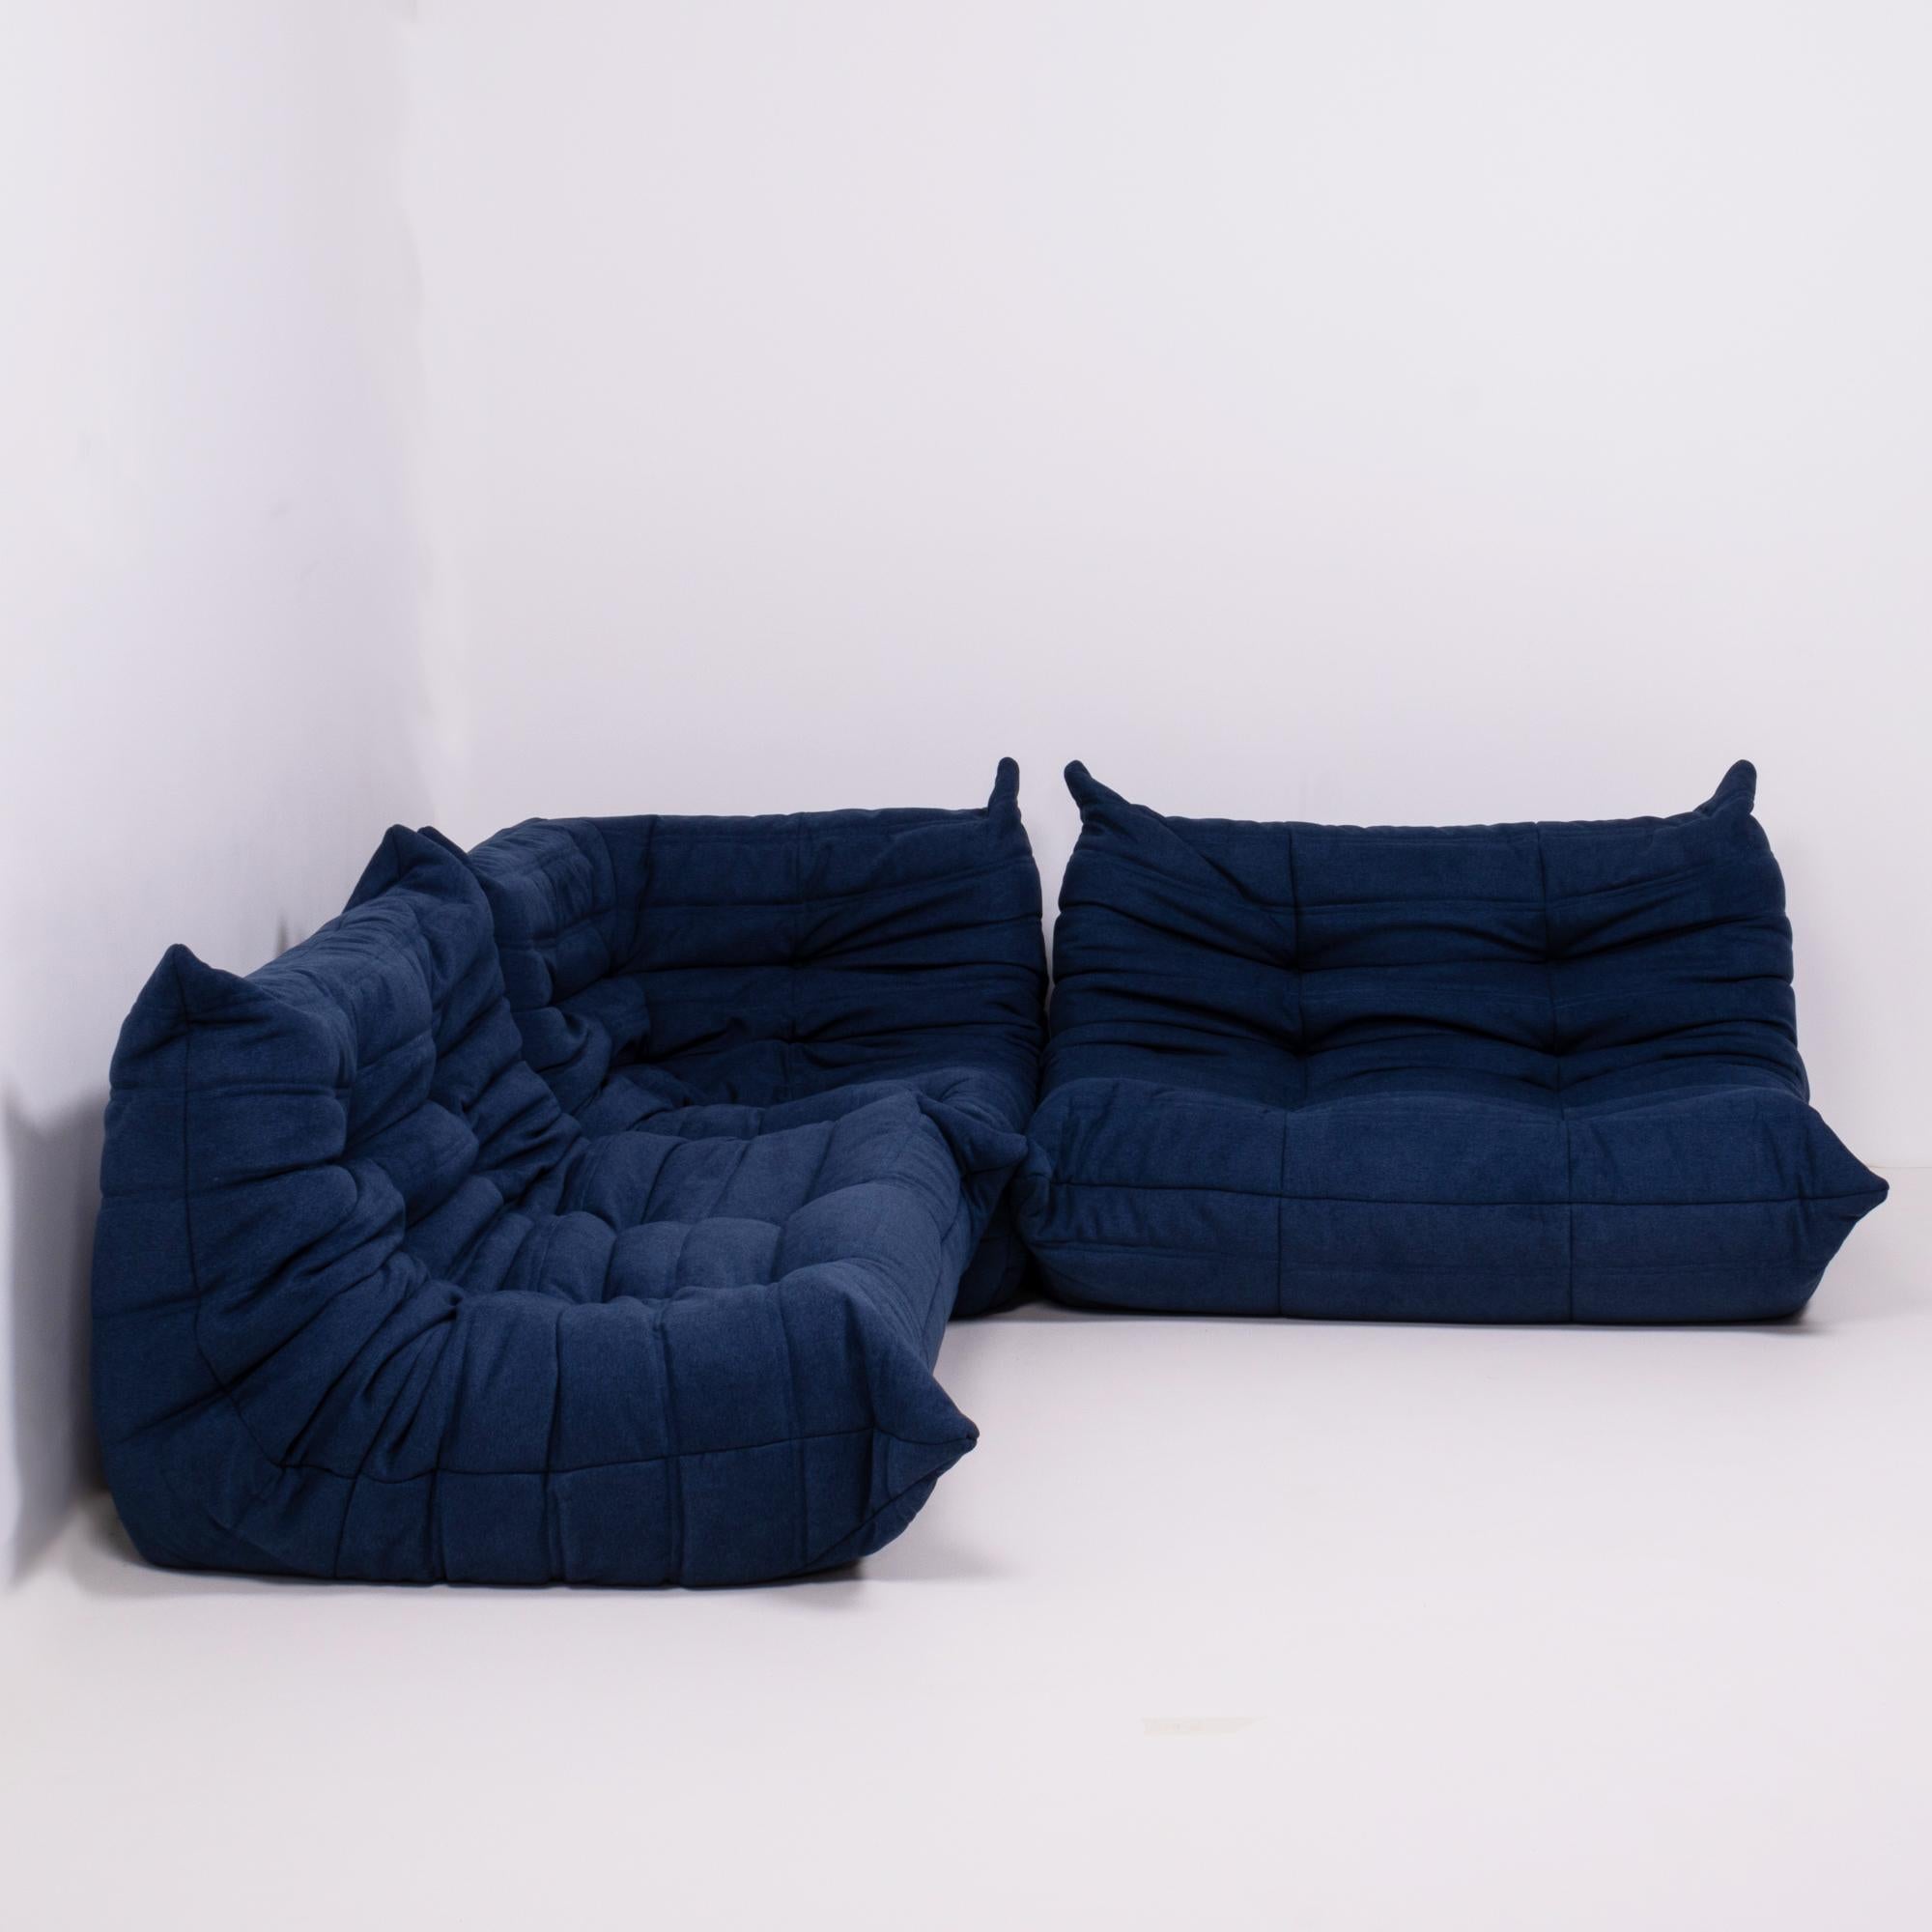 The iconic Togo sofa, originally designed by Michel Ducaroy for Ligne Roset in 1973, has become a design Classic. 

This three-piece modular set is incredibly versatile and can be configured into one large corner sofa or split for a multitude of